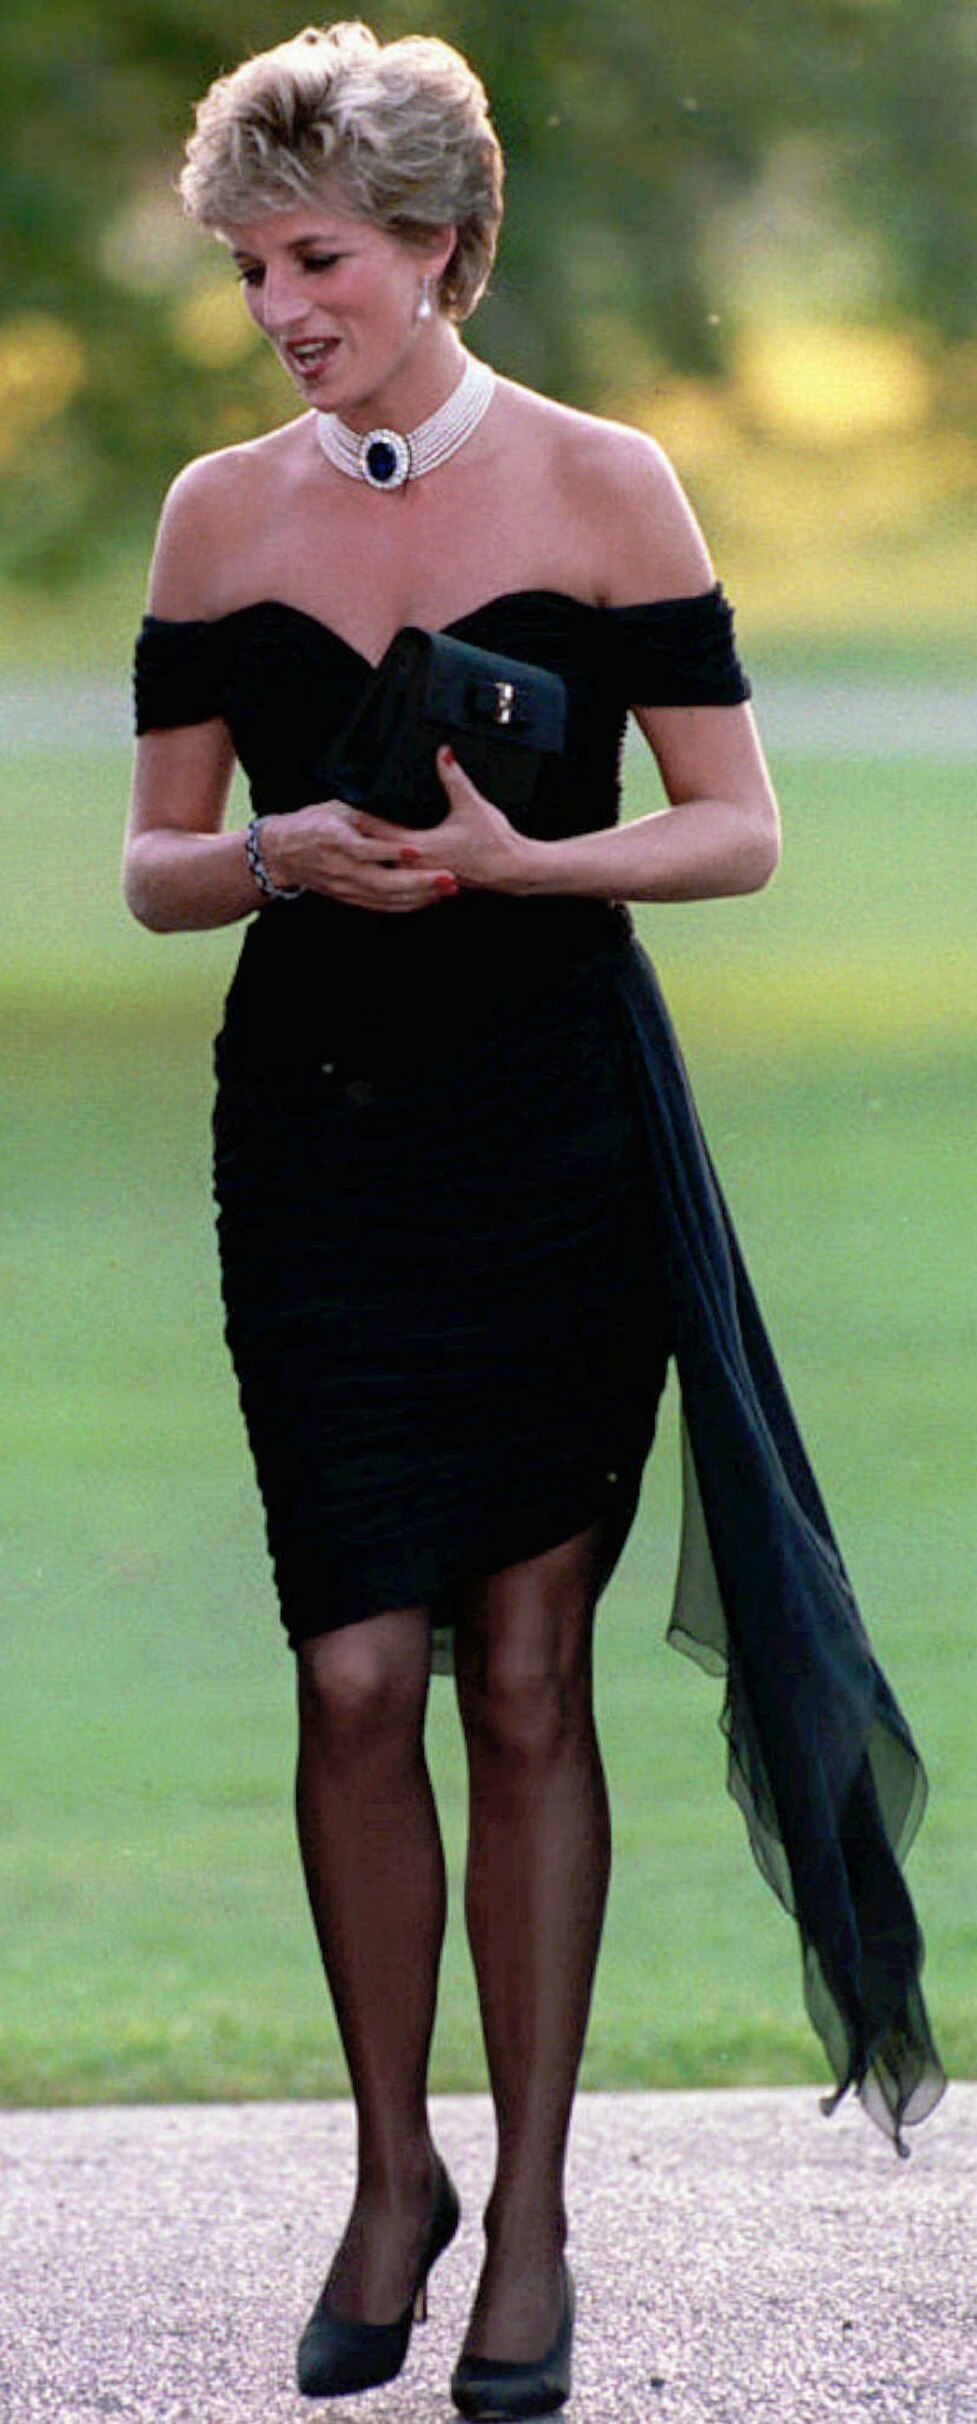 Princess Diana wearing a tight black off-the-shoulder mini dress with a pearl choker